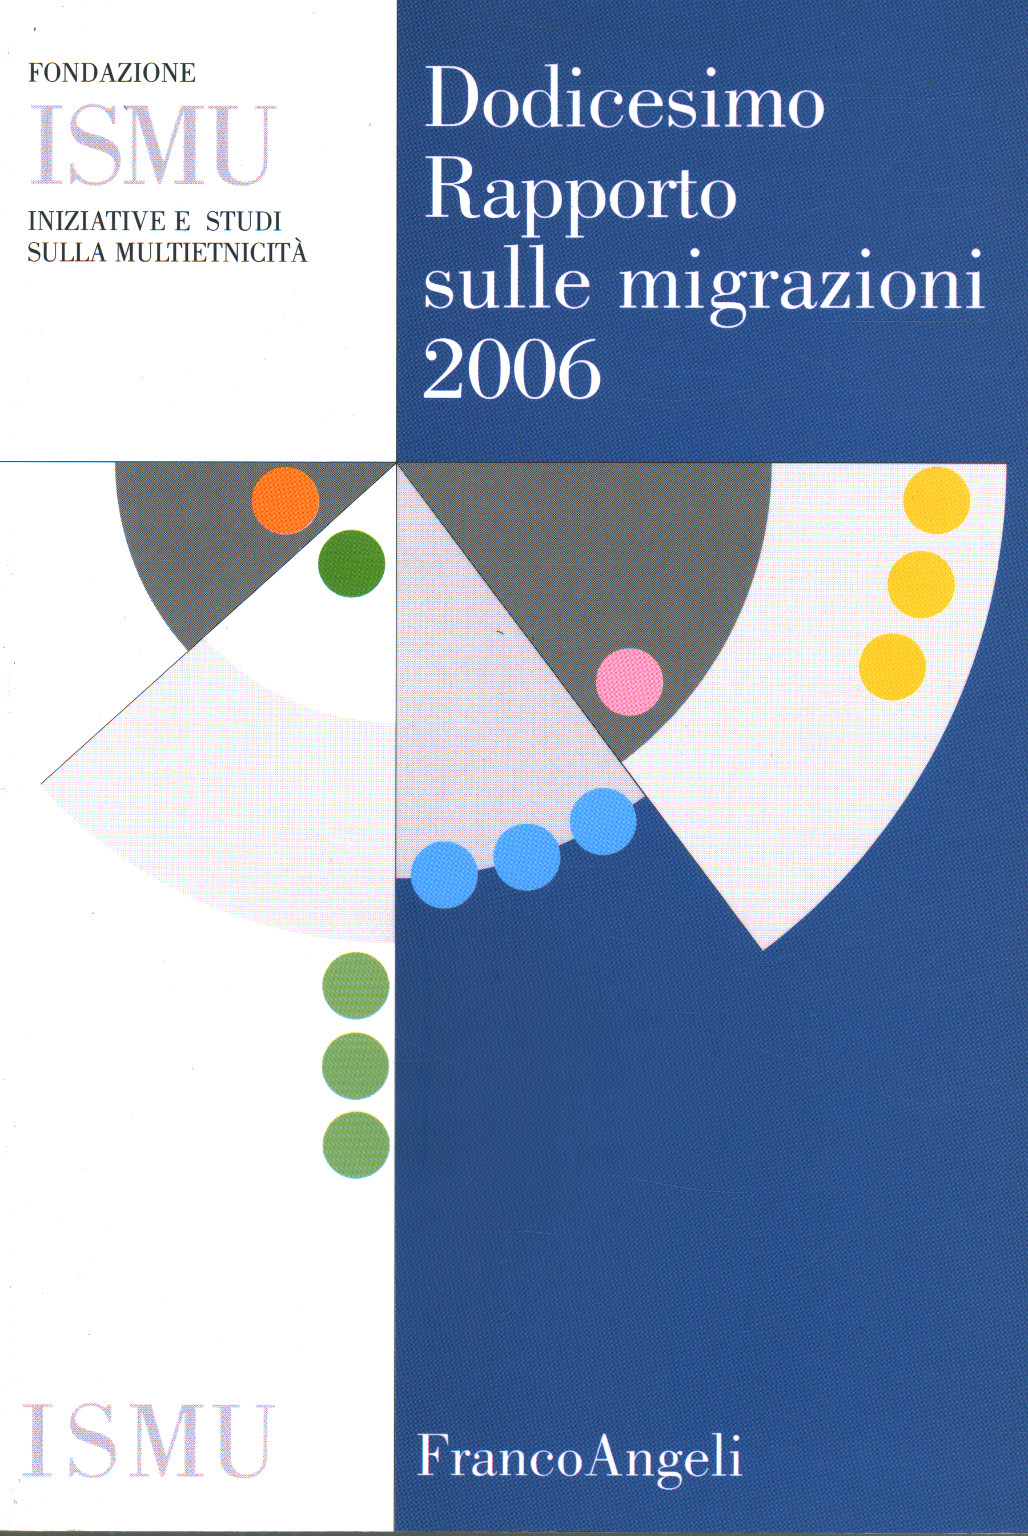 Twelfth report on migrations 2006, s.a.